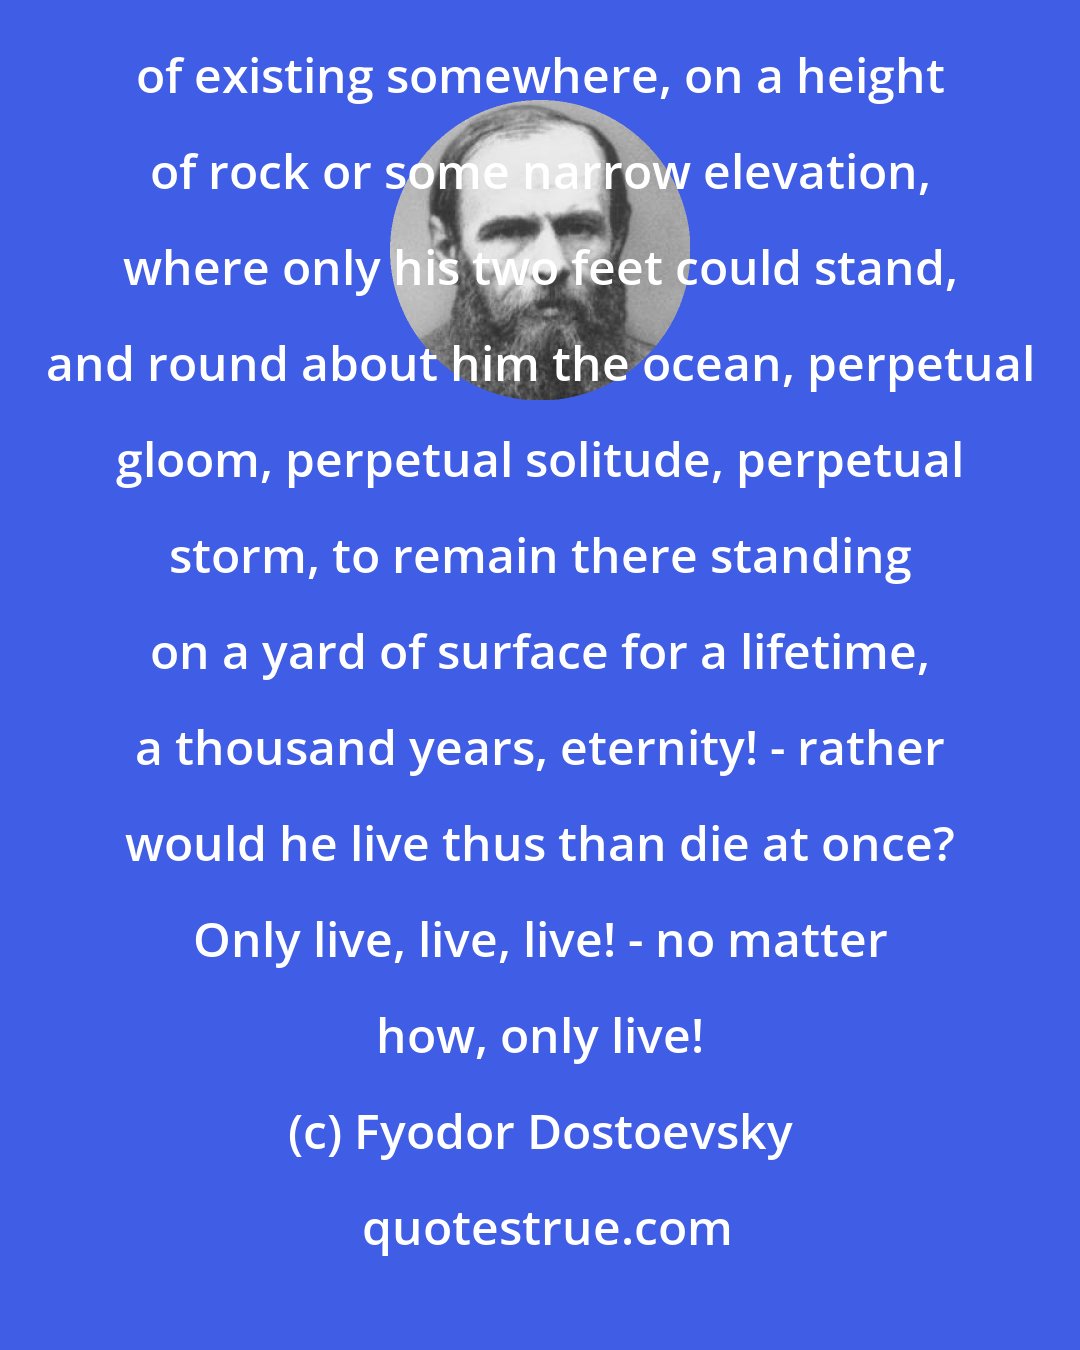 Fyodor Dostoevsky: ...a condemned man who, at the hour of death, says or thinks that if the alternative were offered him of existing somewhere, on a height of rock or some narrow elevation, where only his two feet could stand, and round about him the ocean, perpetual gloom, perpetual solitude, perpetual storm, to remain there standing on a yard of surface for a lifetime, a thousand years, eternity! - rather would he live thus than die at once? Only live, live, live! - no matter how, only live!